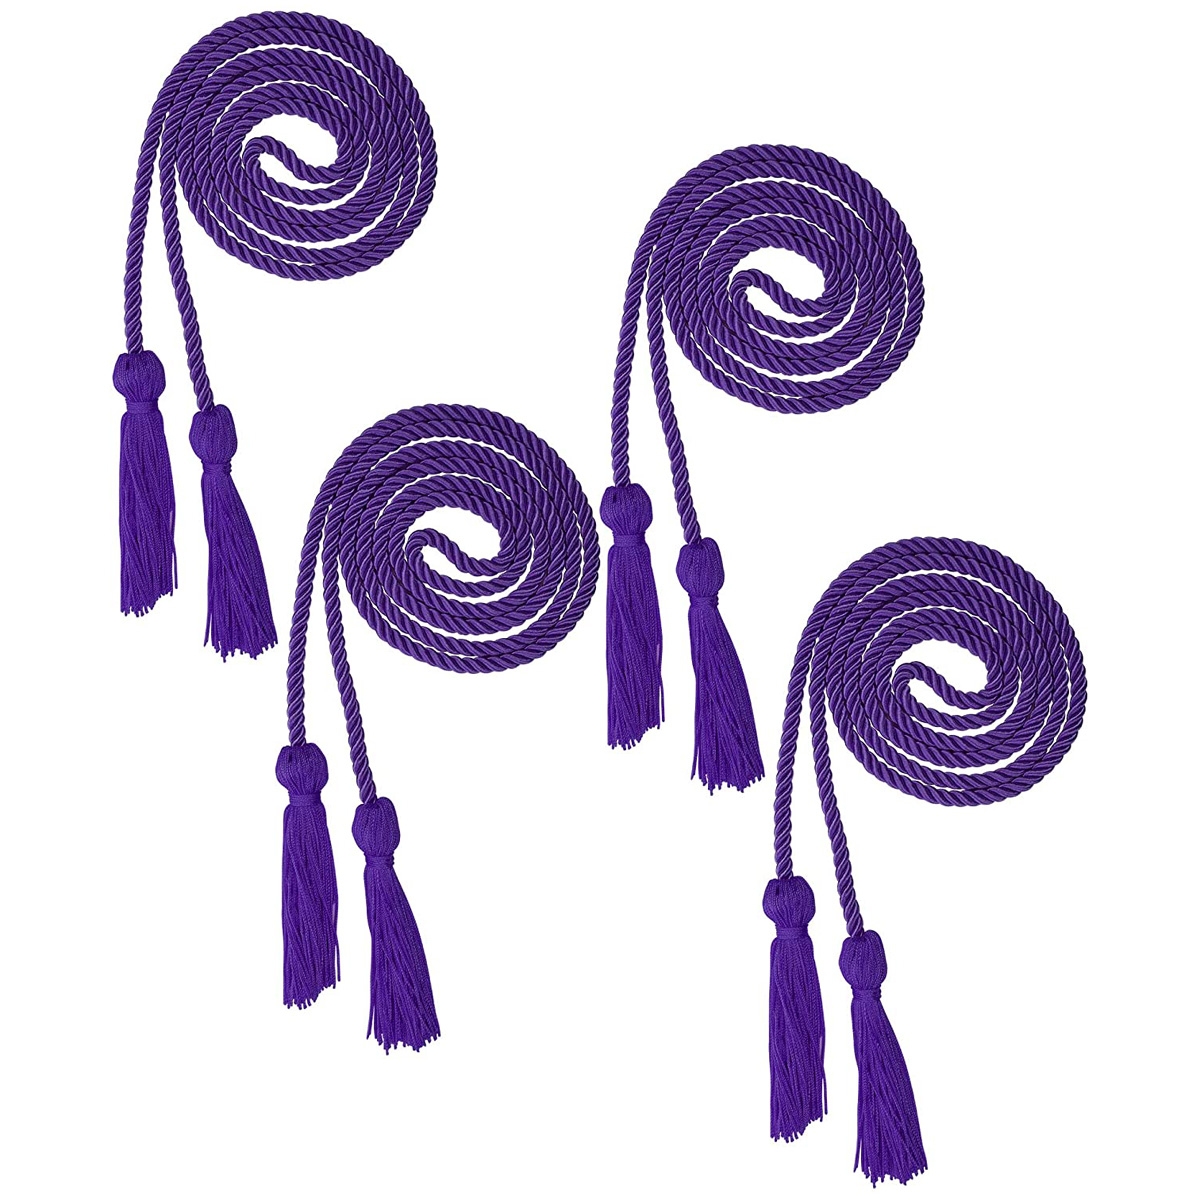 Graduation Honor Braided Cords with Sewing Tassels Polyester Yarn Honor Cord for Bachelor Gown 